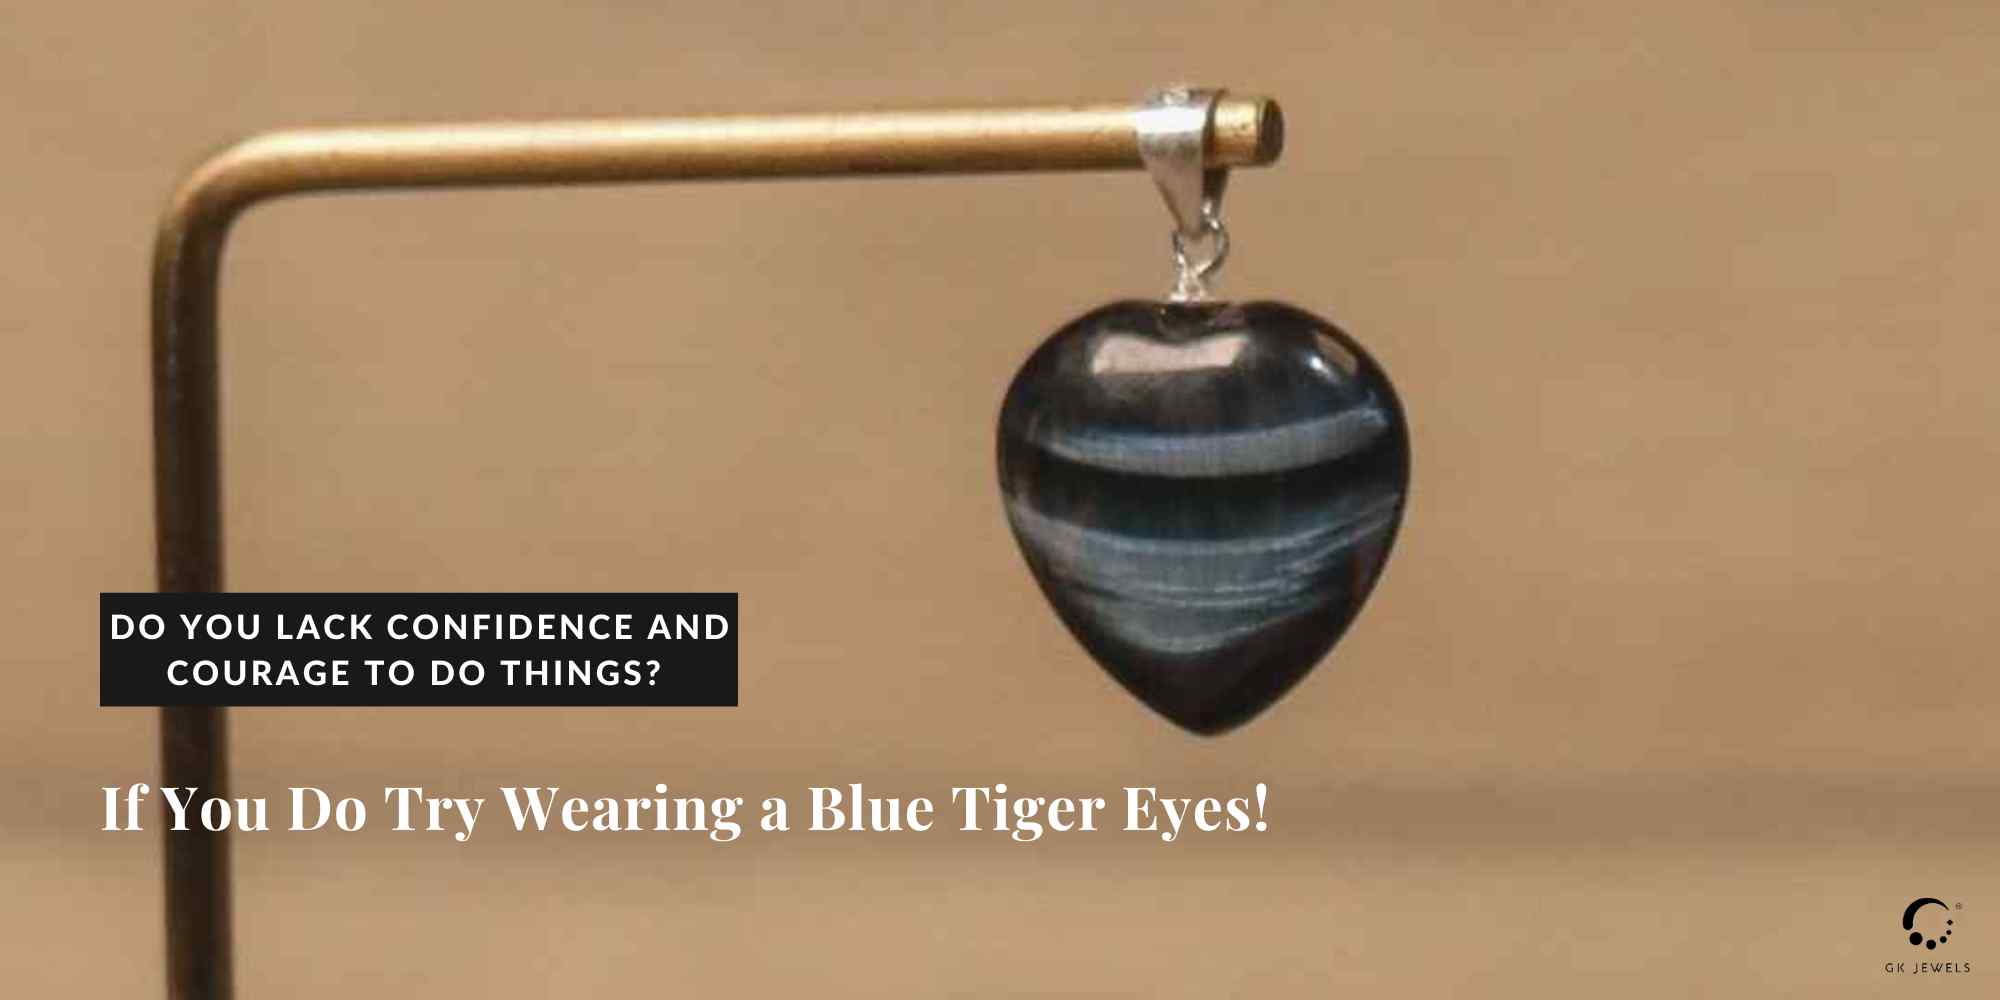 Do you lack confidence and courage to do things? If you do try wearing a Blue Tiger Eyes!